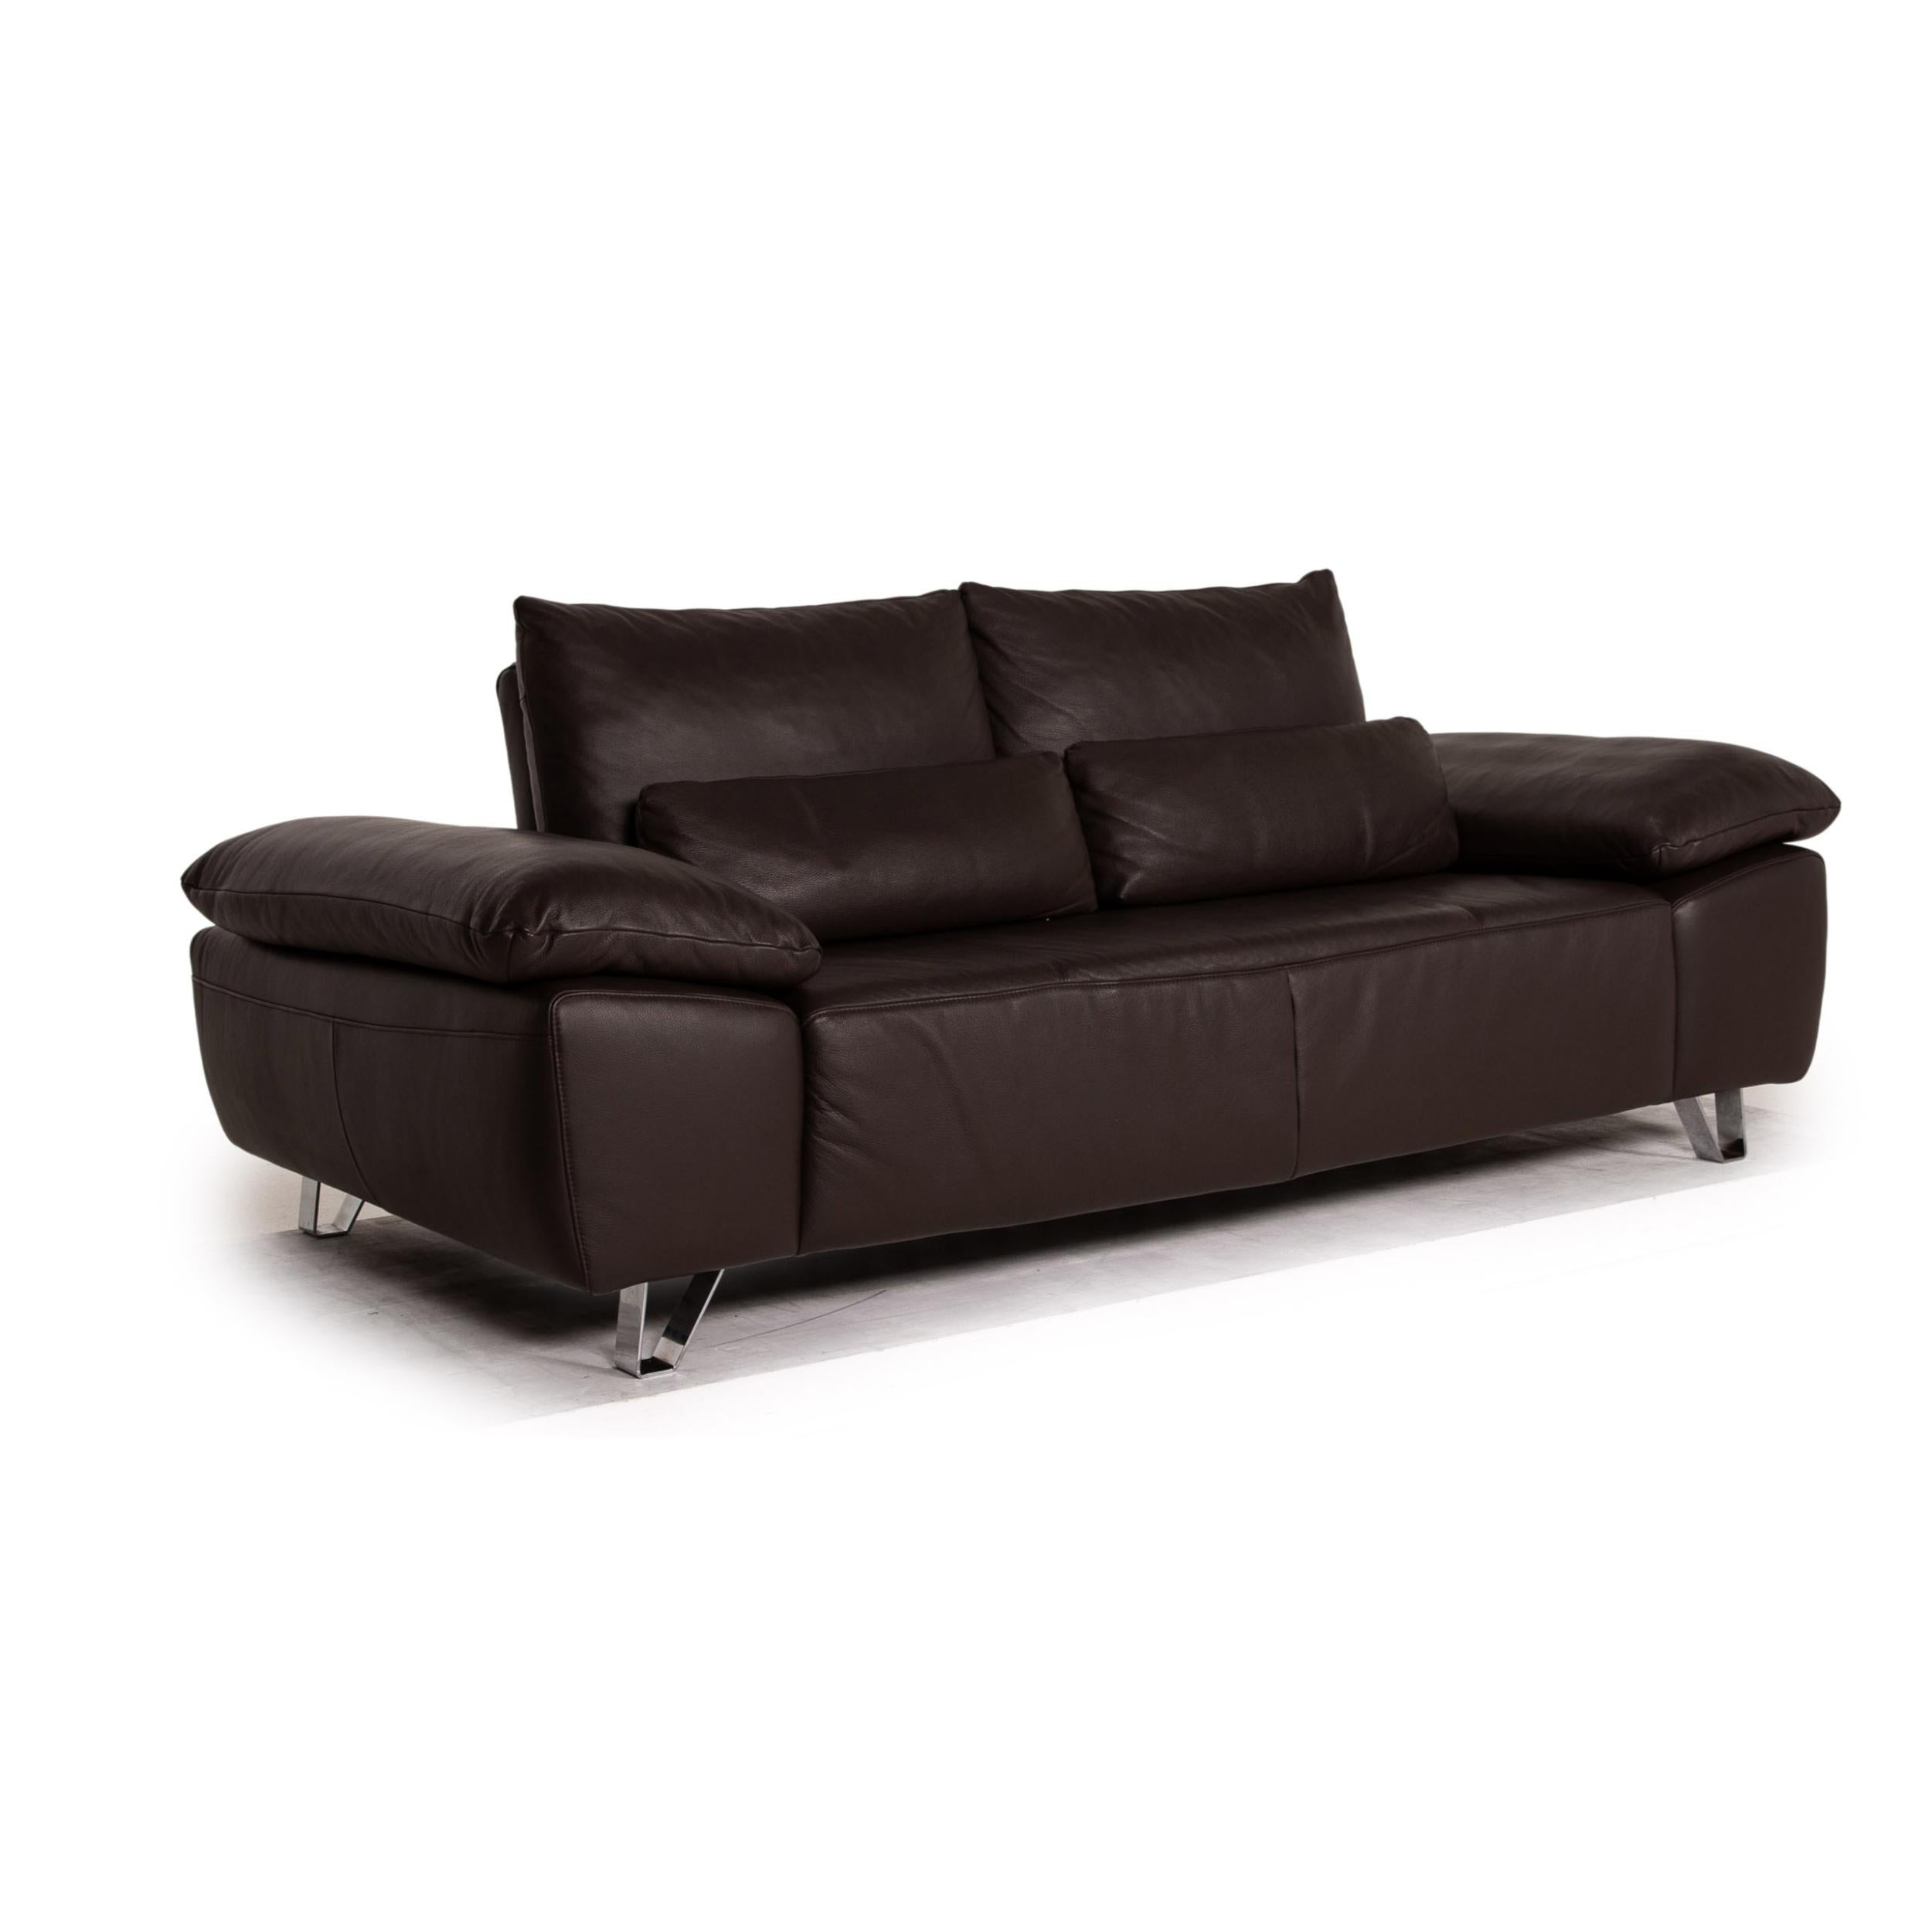 Musterring MR 680 Two-Seater Sofa Brown Leather Couch Function 1